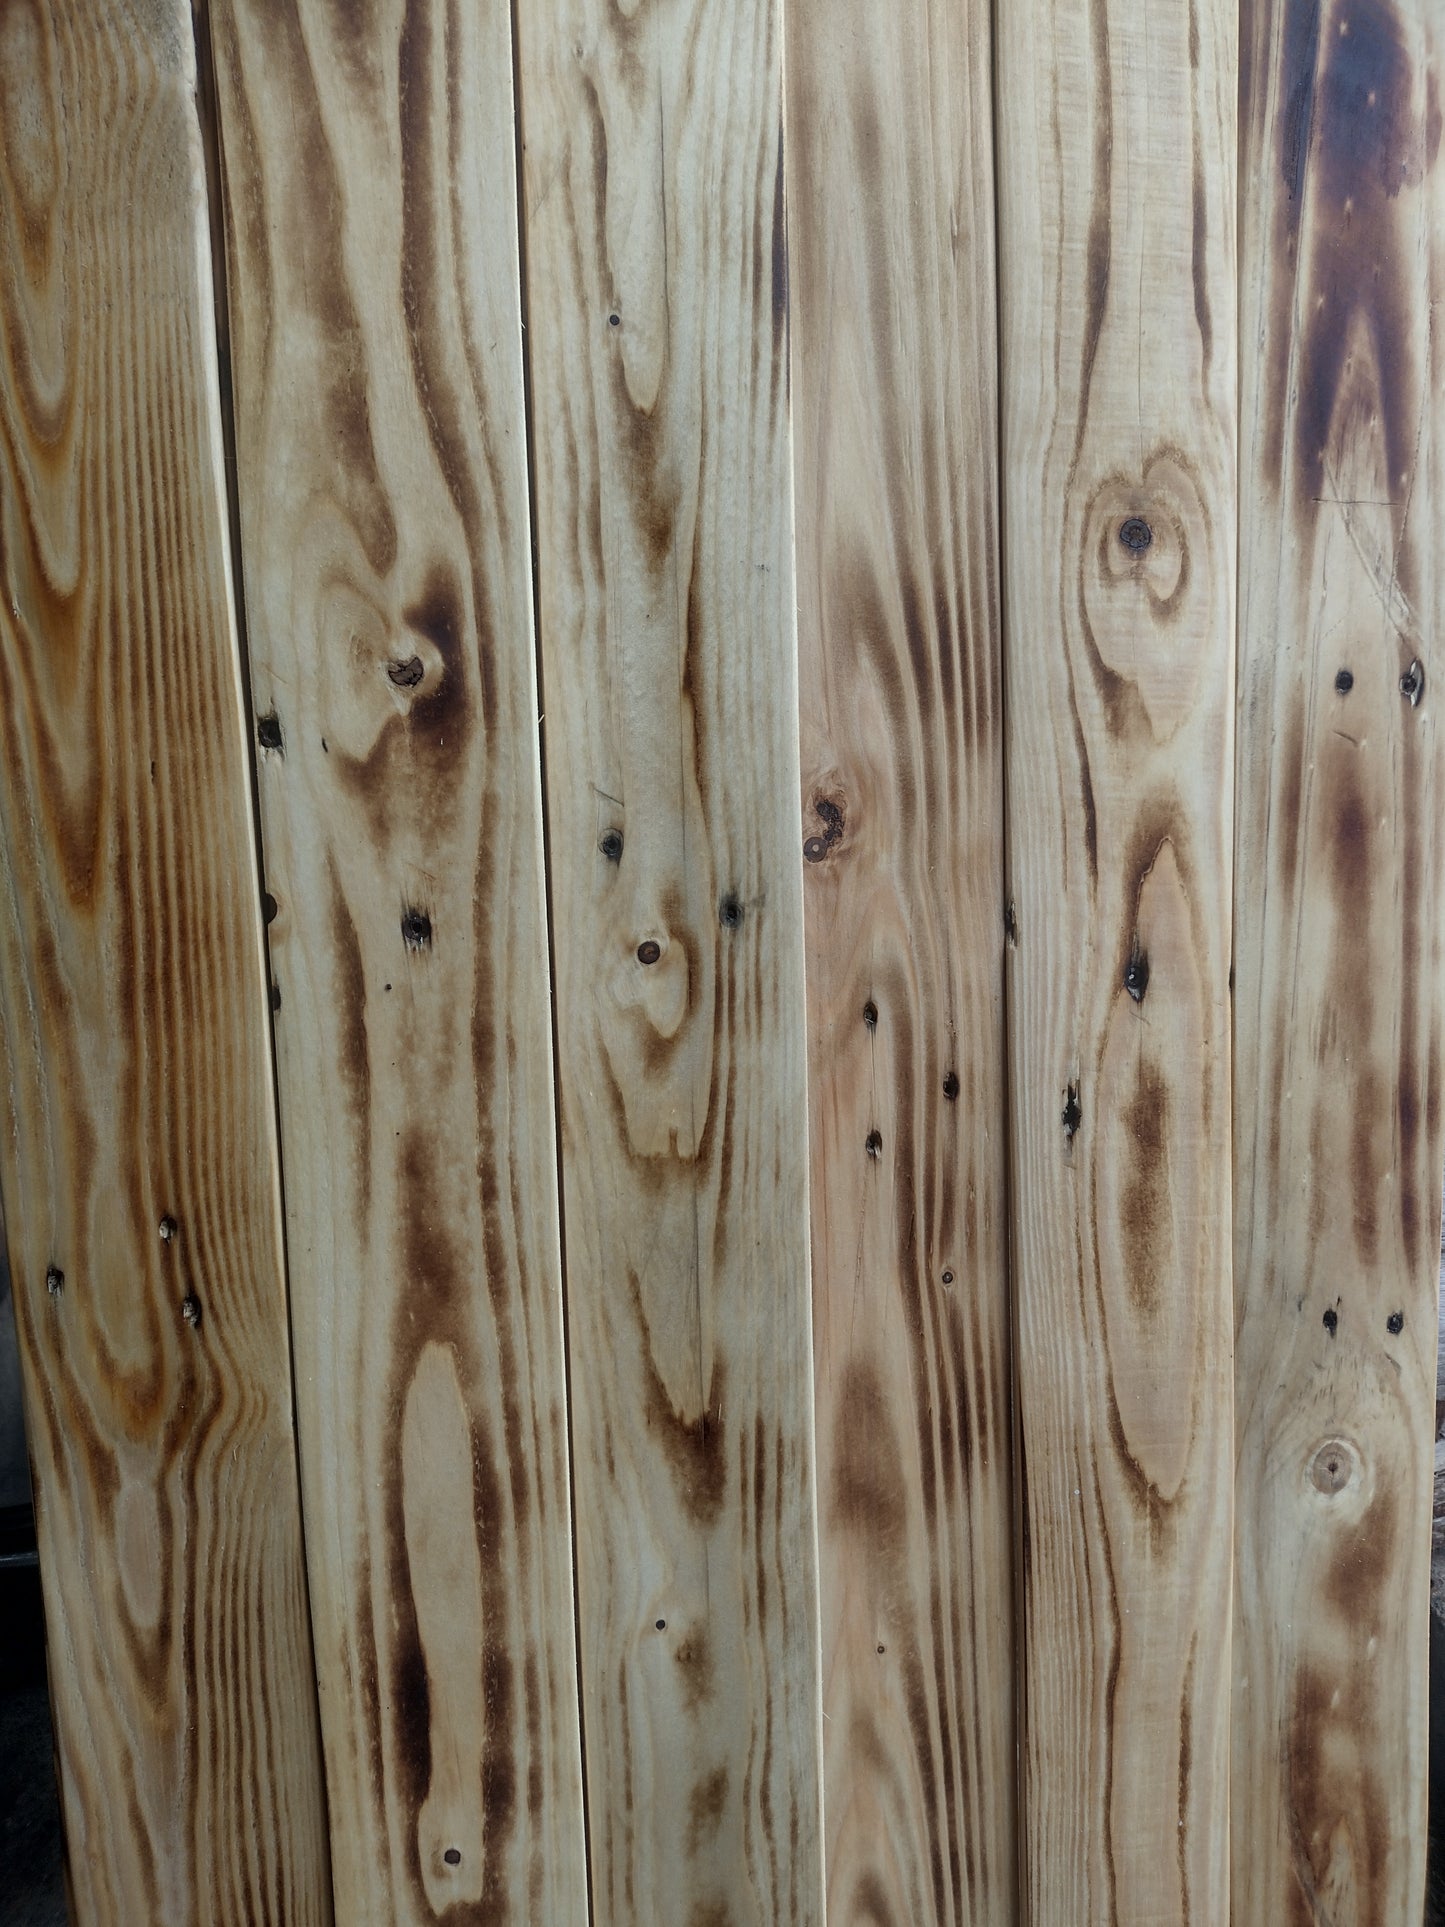 Charred Wooden Planks 1sqm  - Sanded and De-nailed